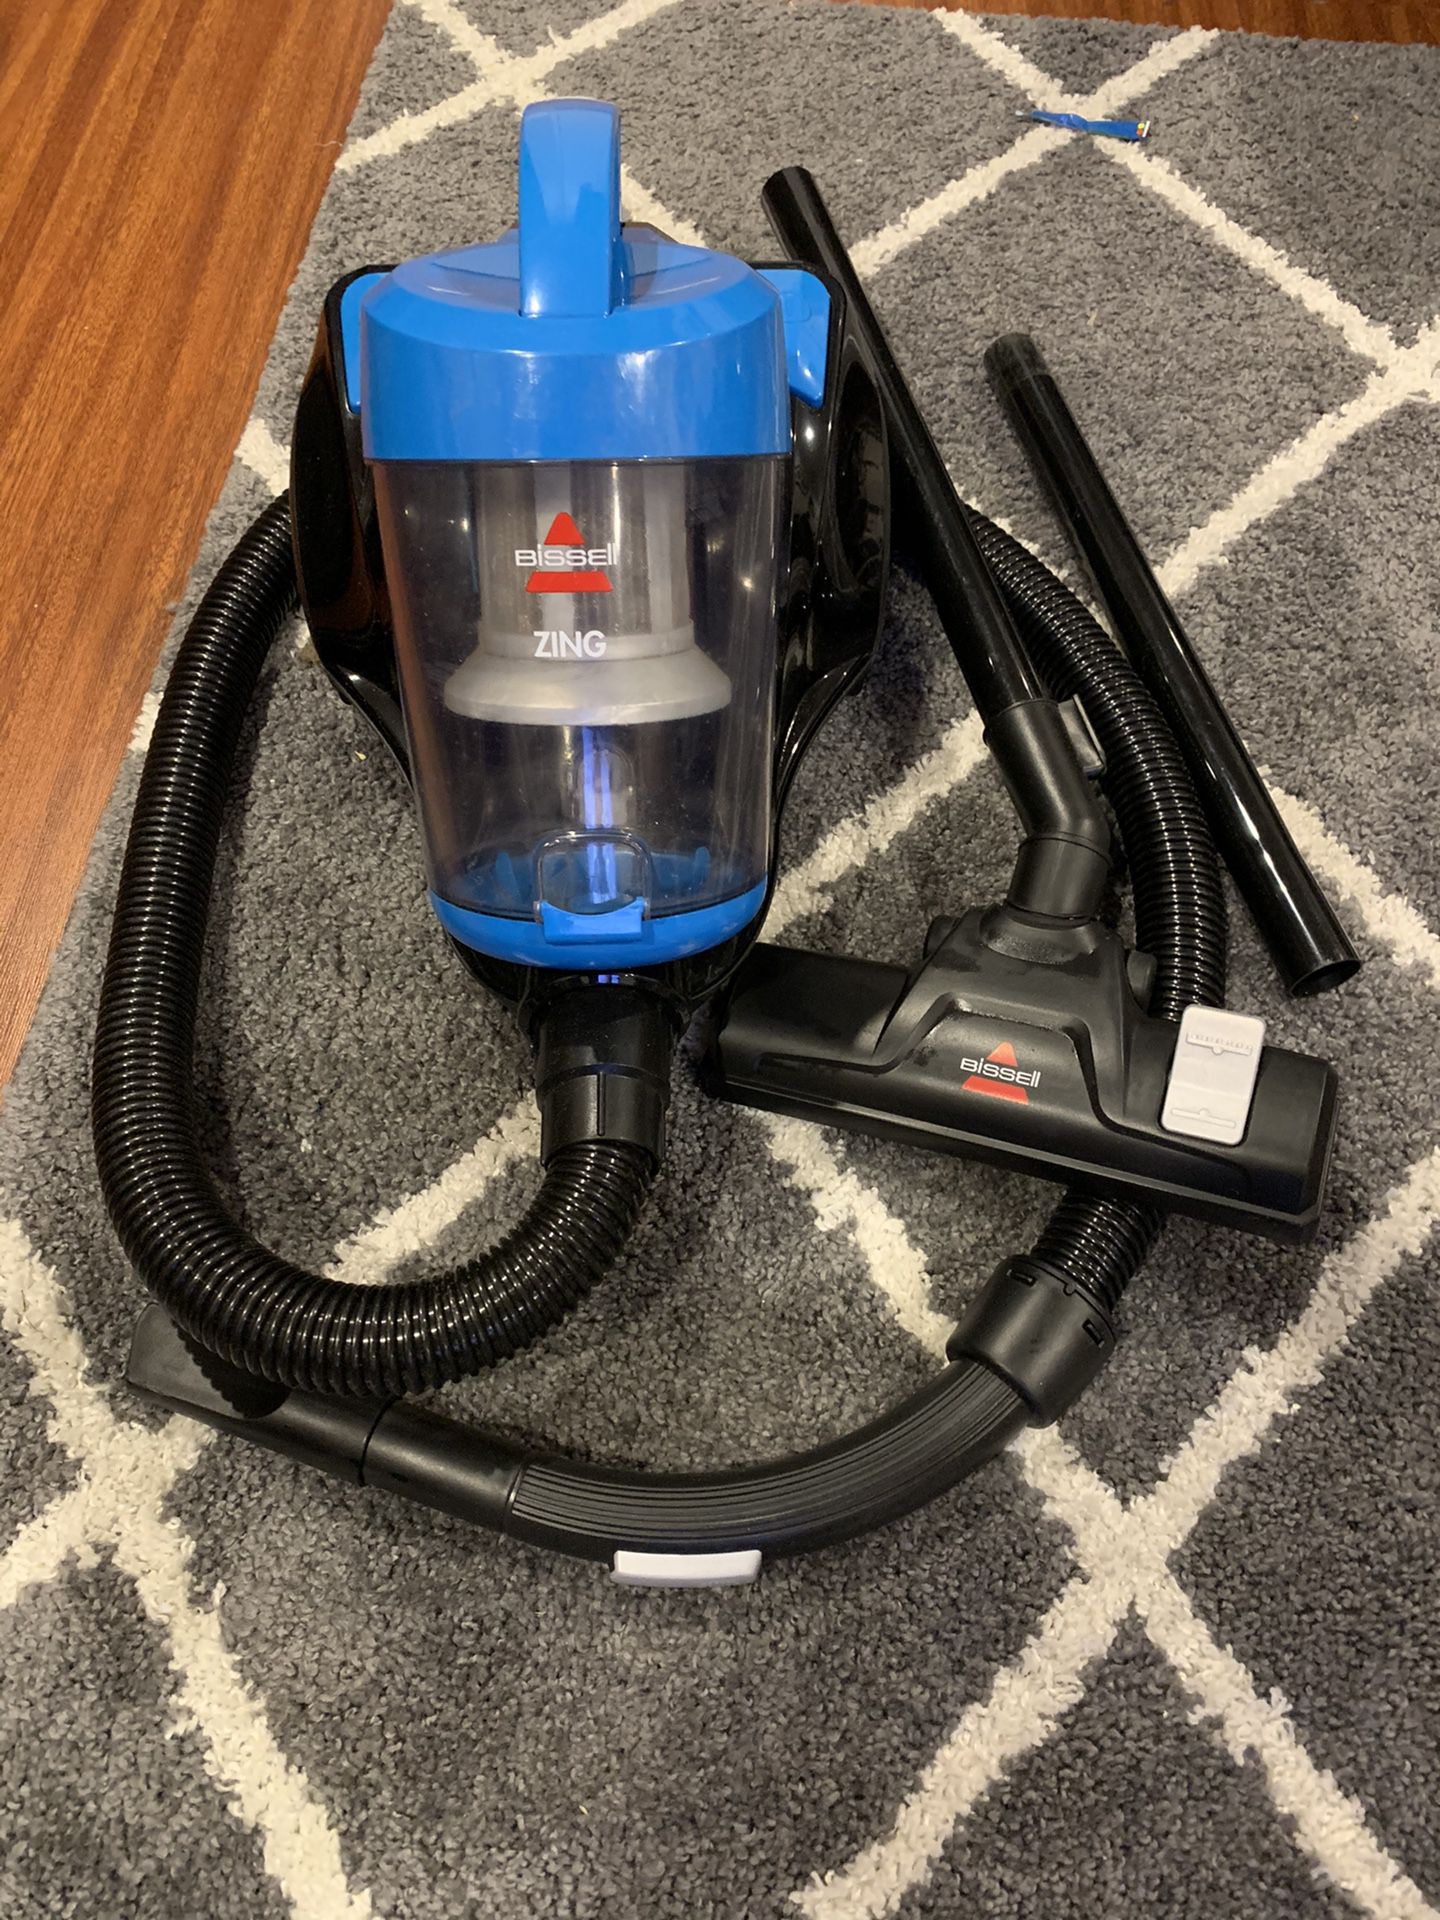 BISSELL ZING BAGLESS CANISTER VACUUM